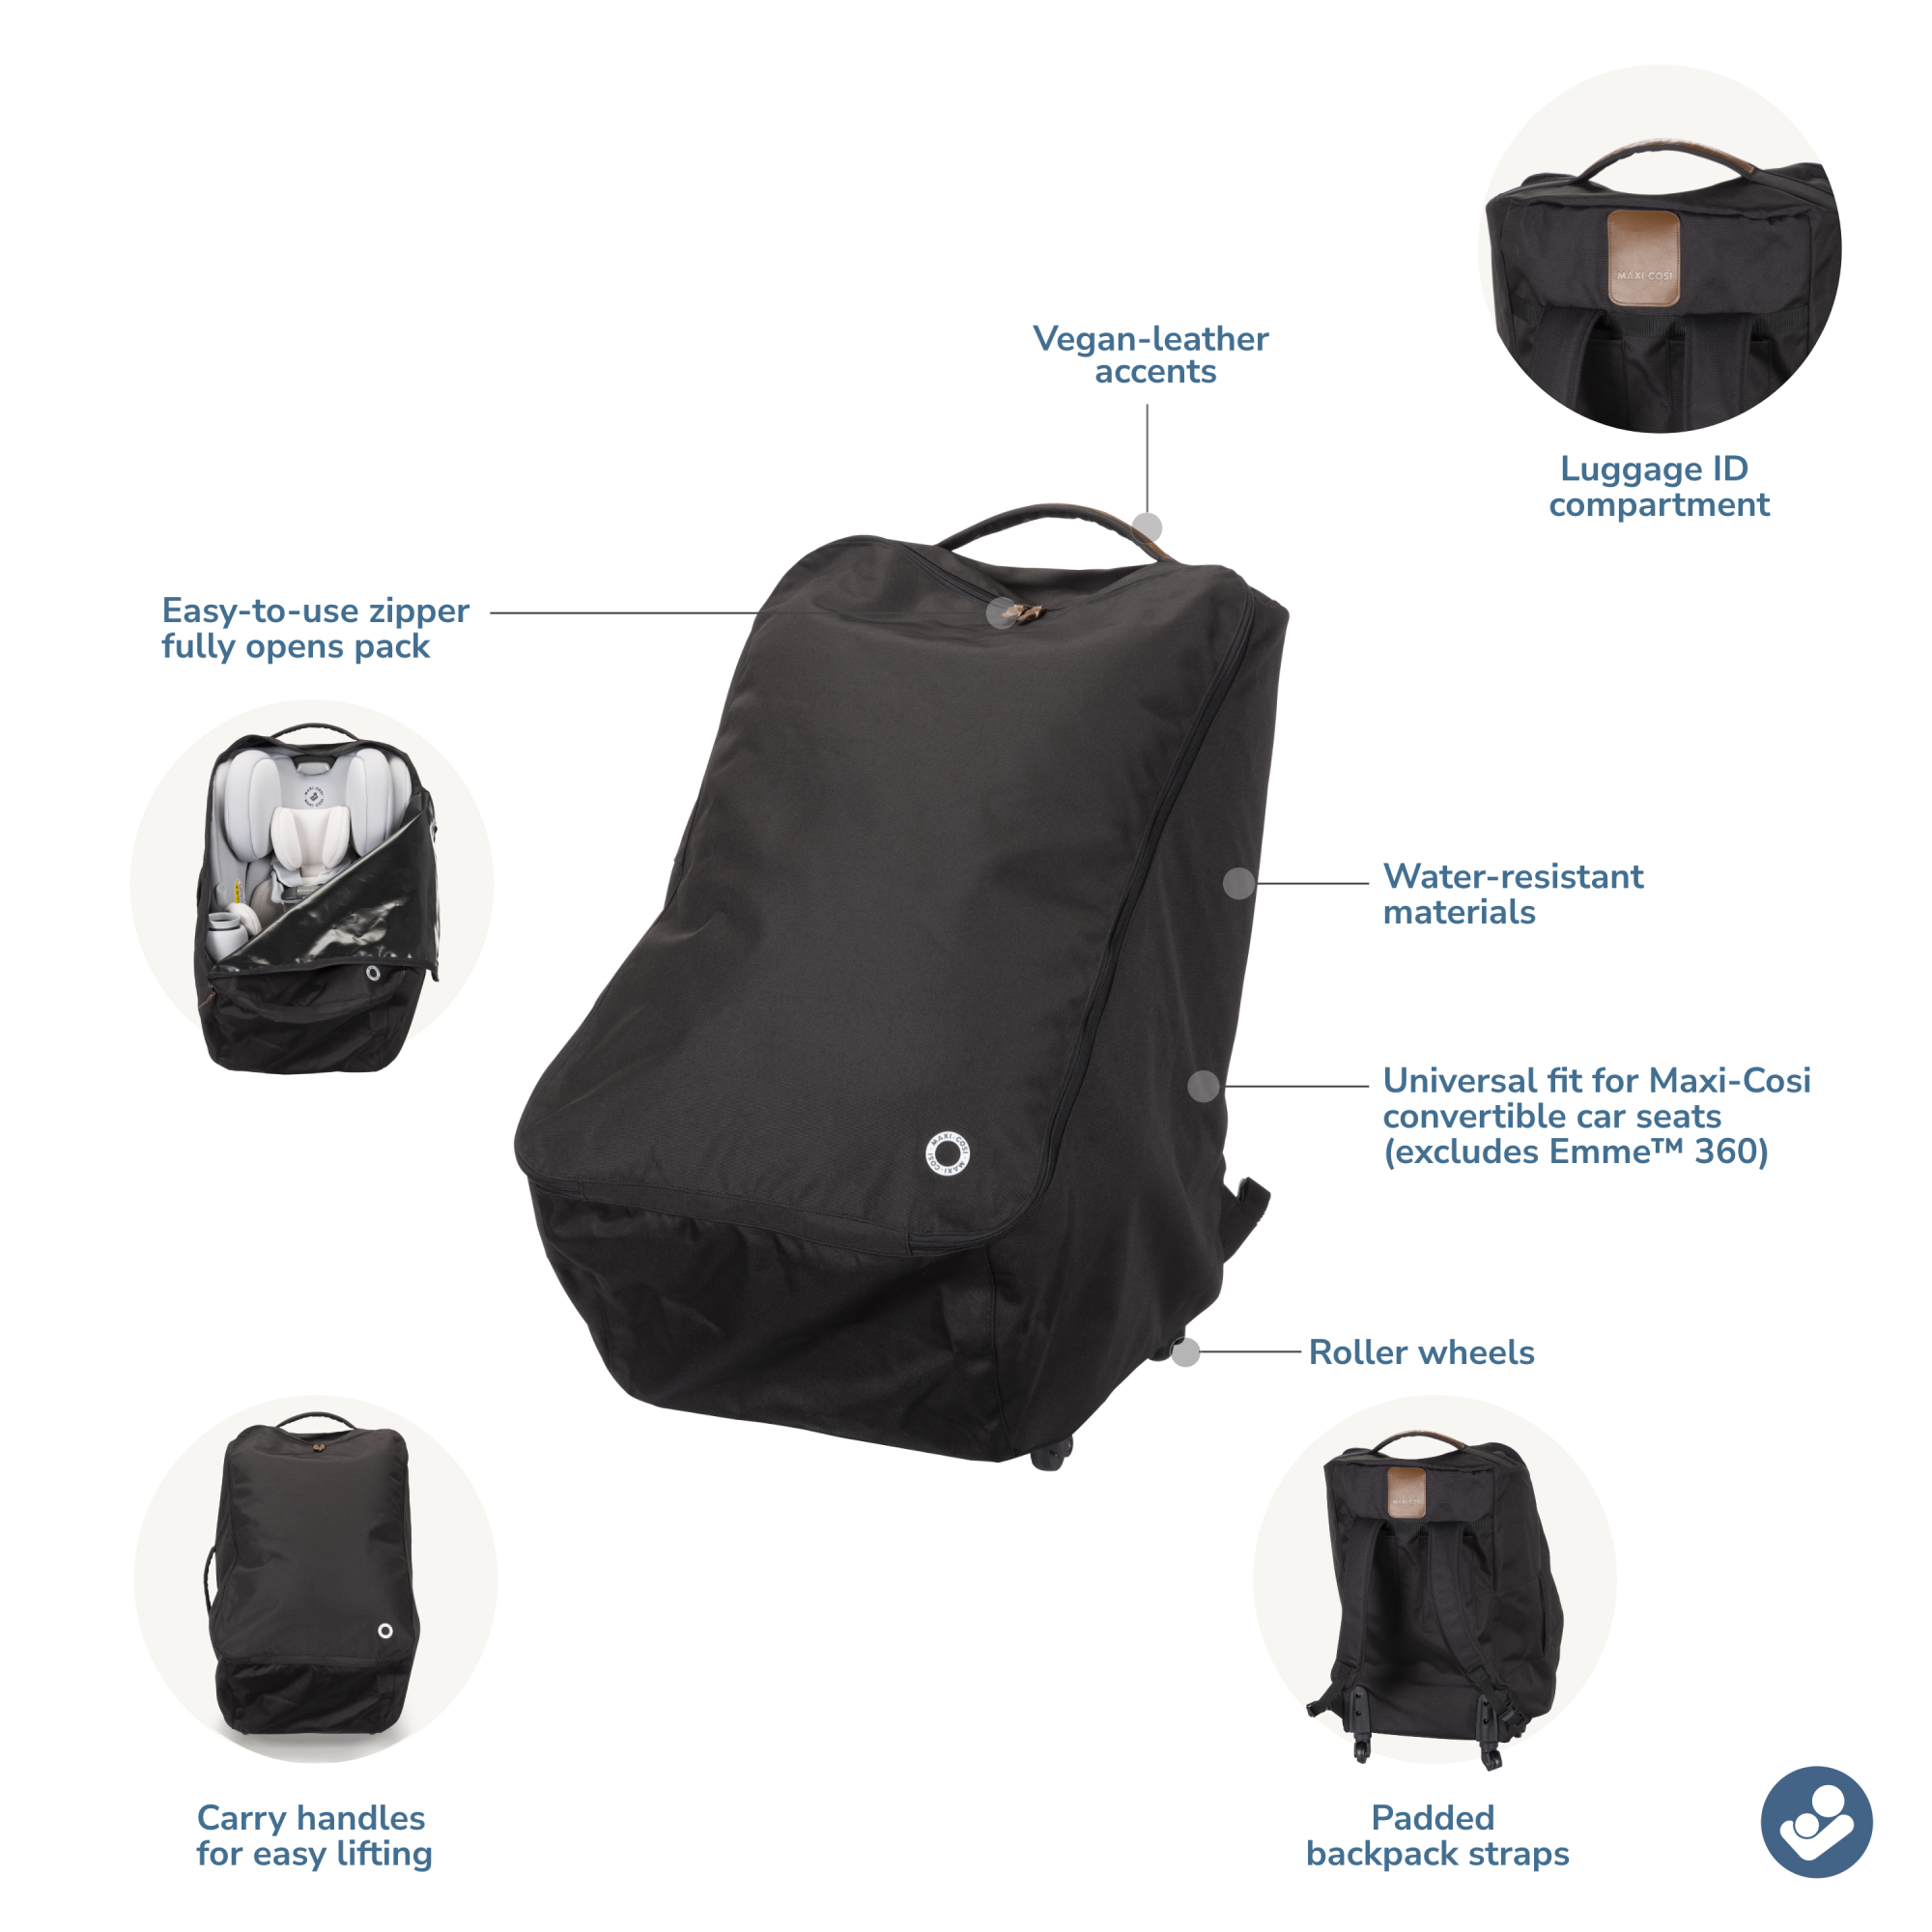 Wheeled Car Seat Travel Pack - woman carrying pack on back